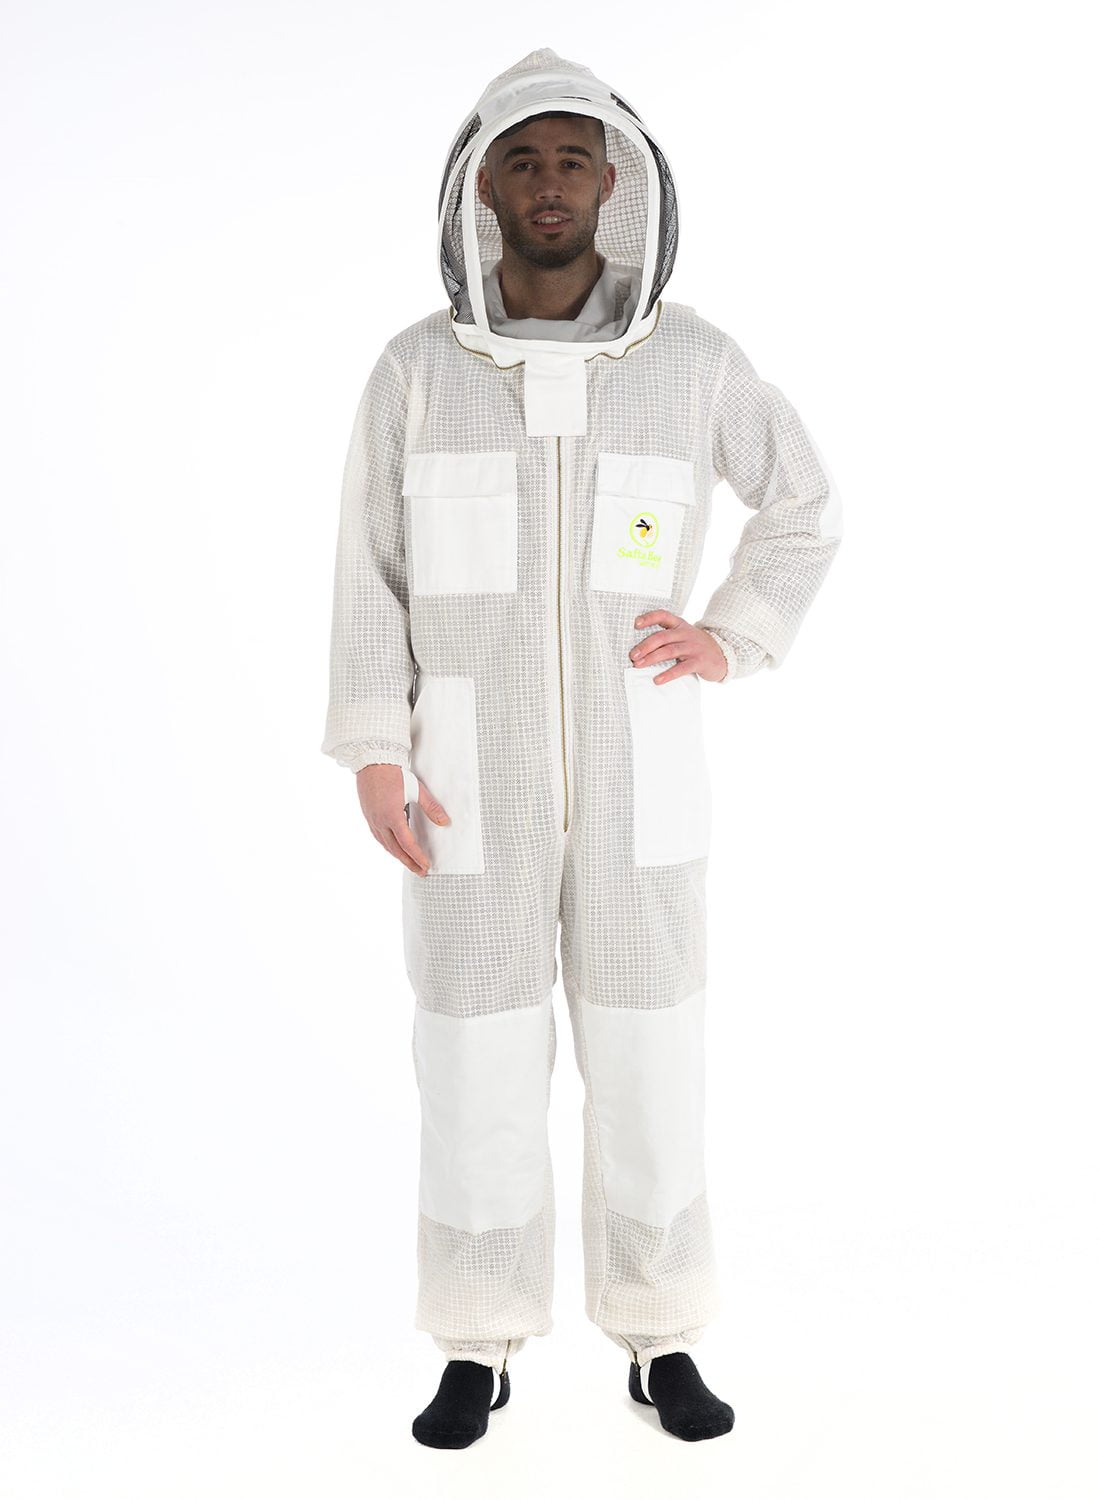 Details about   Ultra Ventilated 3 Layers Pilot Beekeeping Suit Extra Ordinary Features Size 3XL 